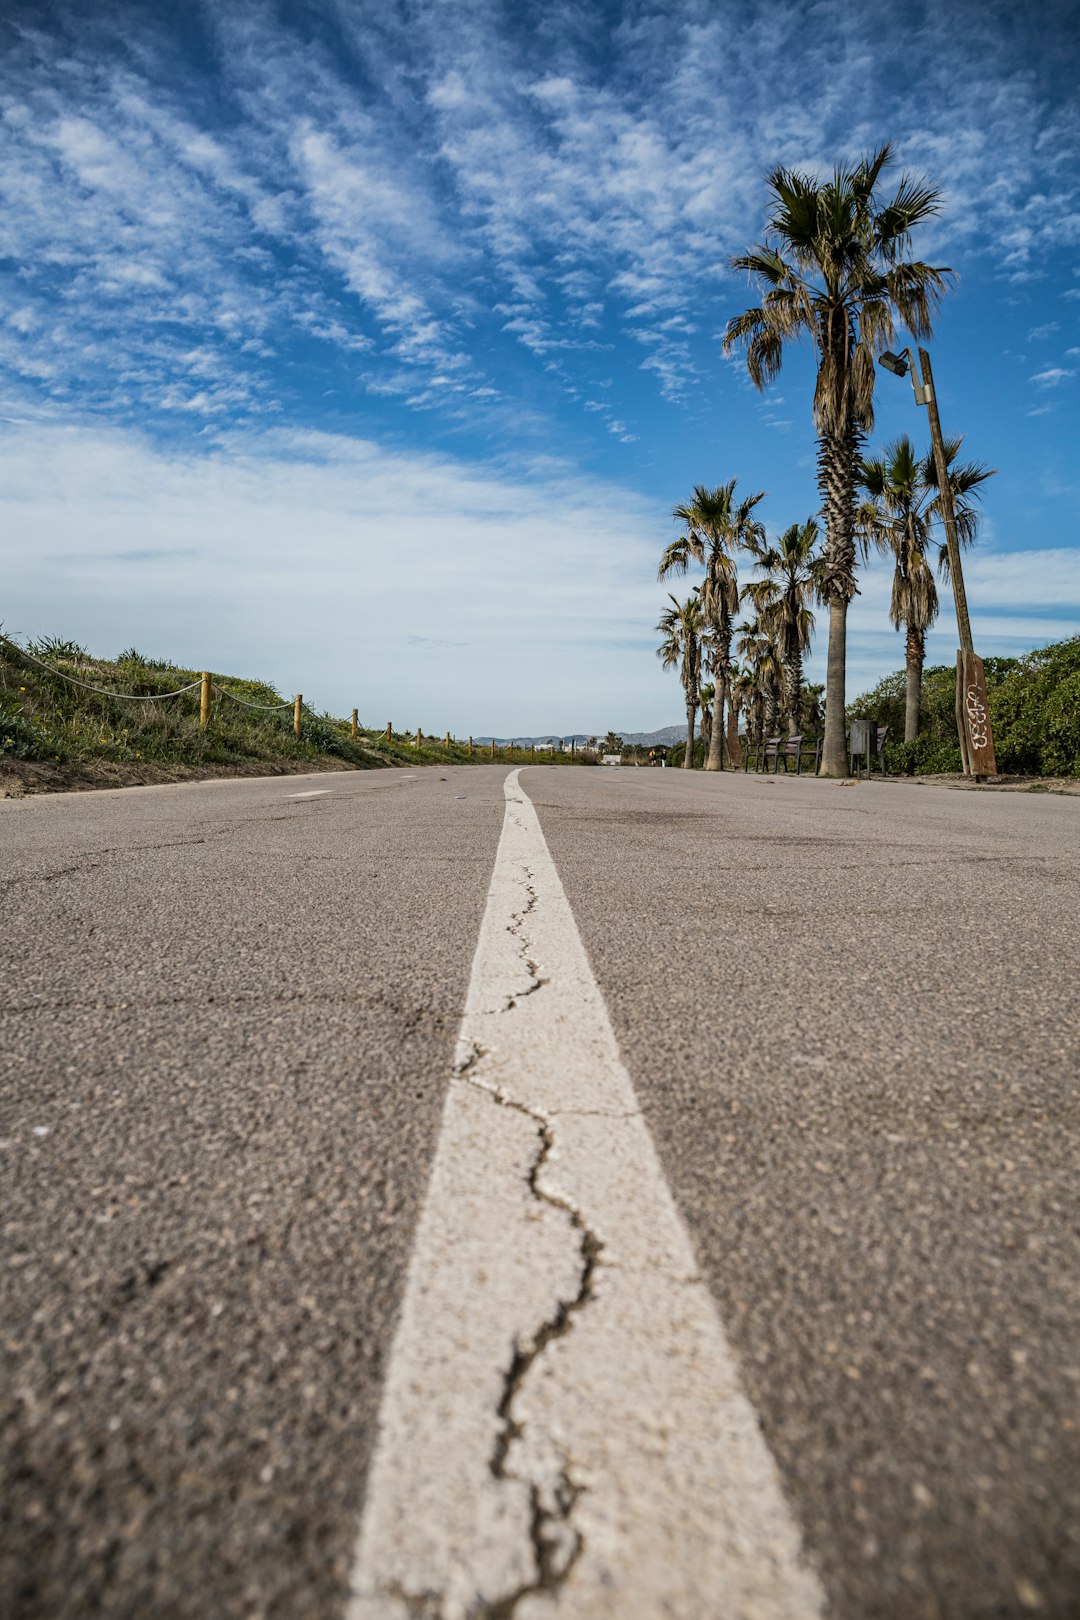 gray concrete road between green palm trees under blue sky during daytime